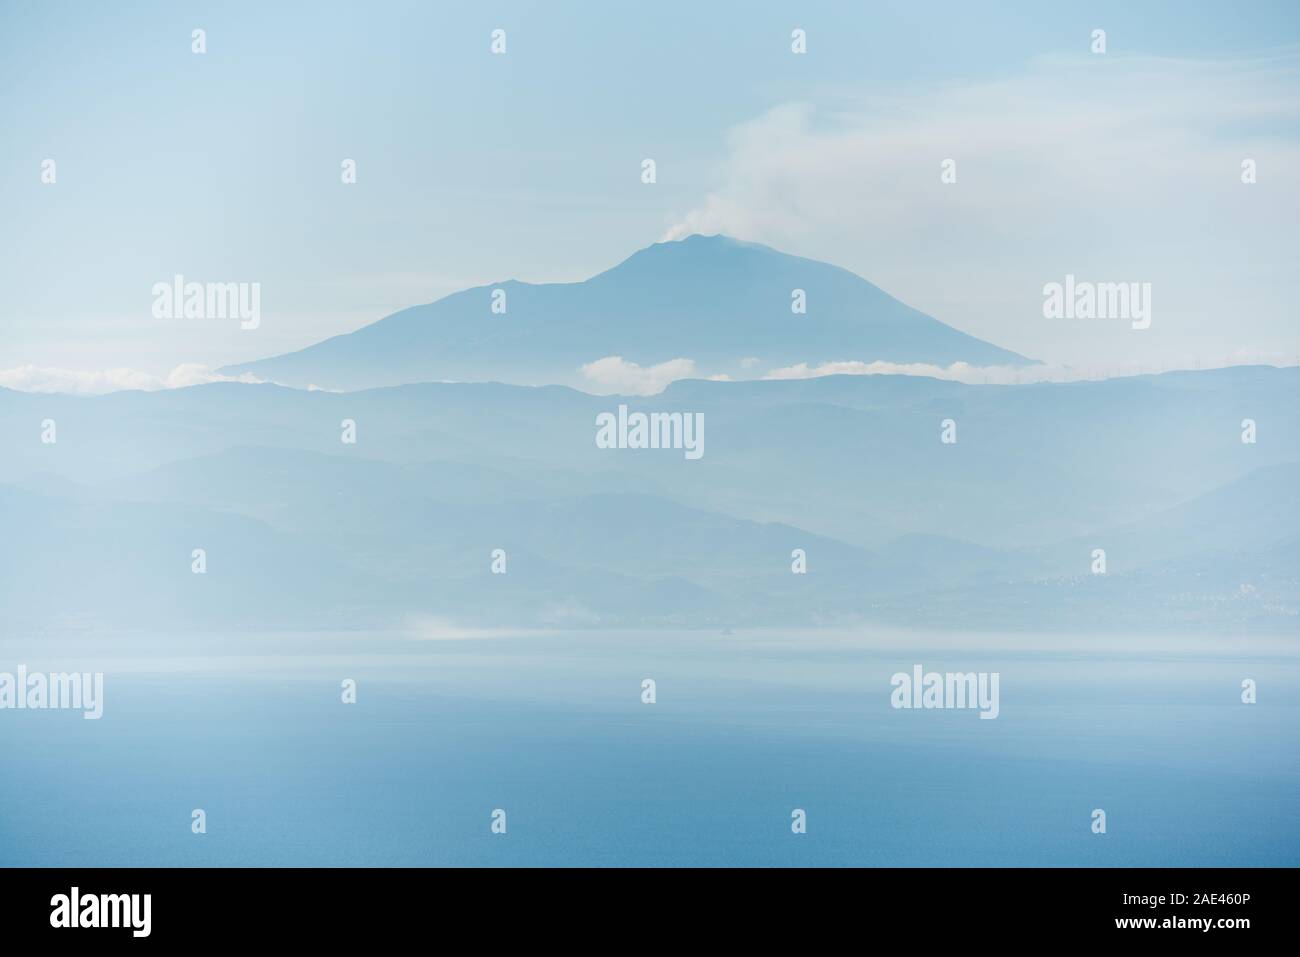 the etna active volcano blue silhouette trough atmospheric perspective Stock Photo